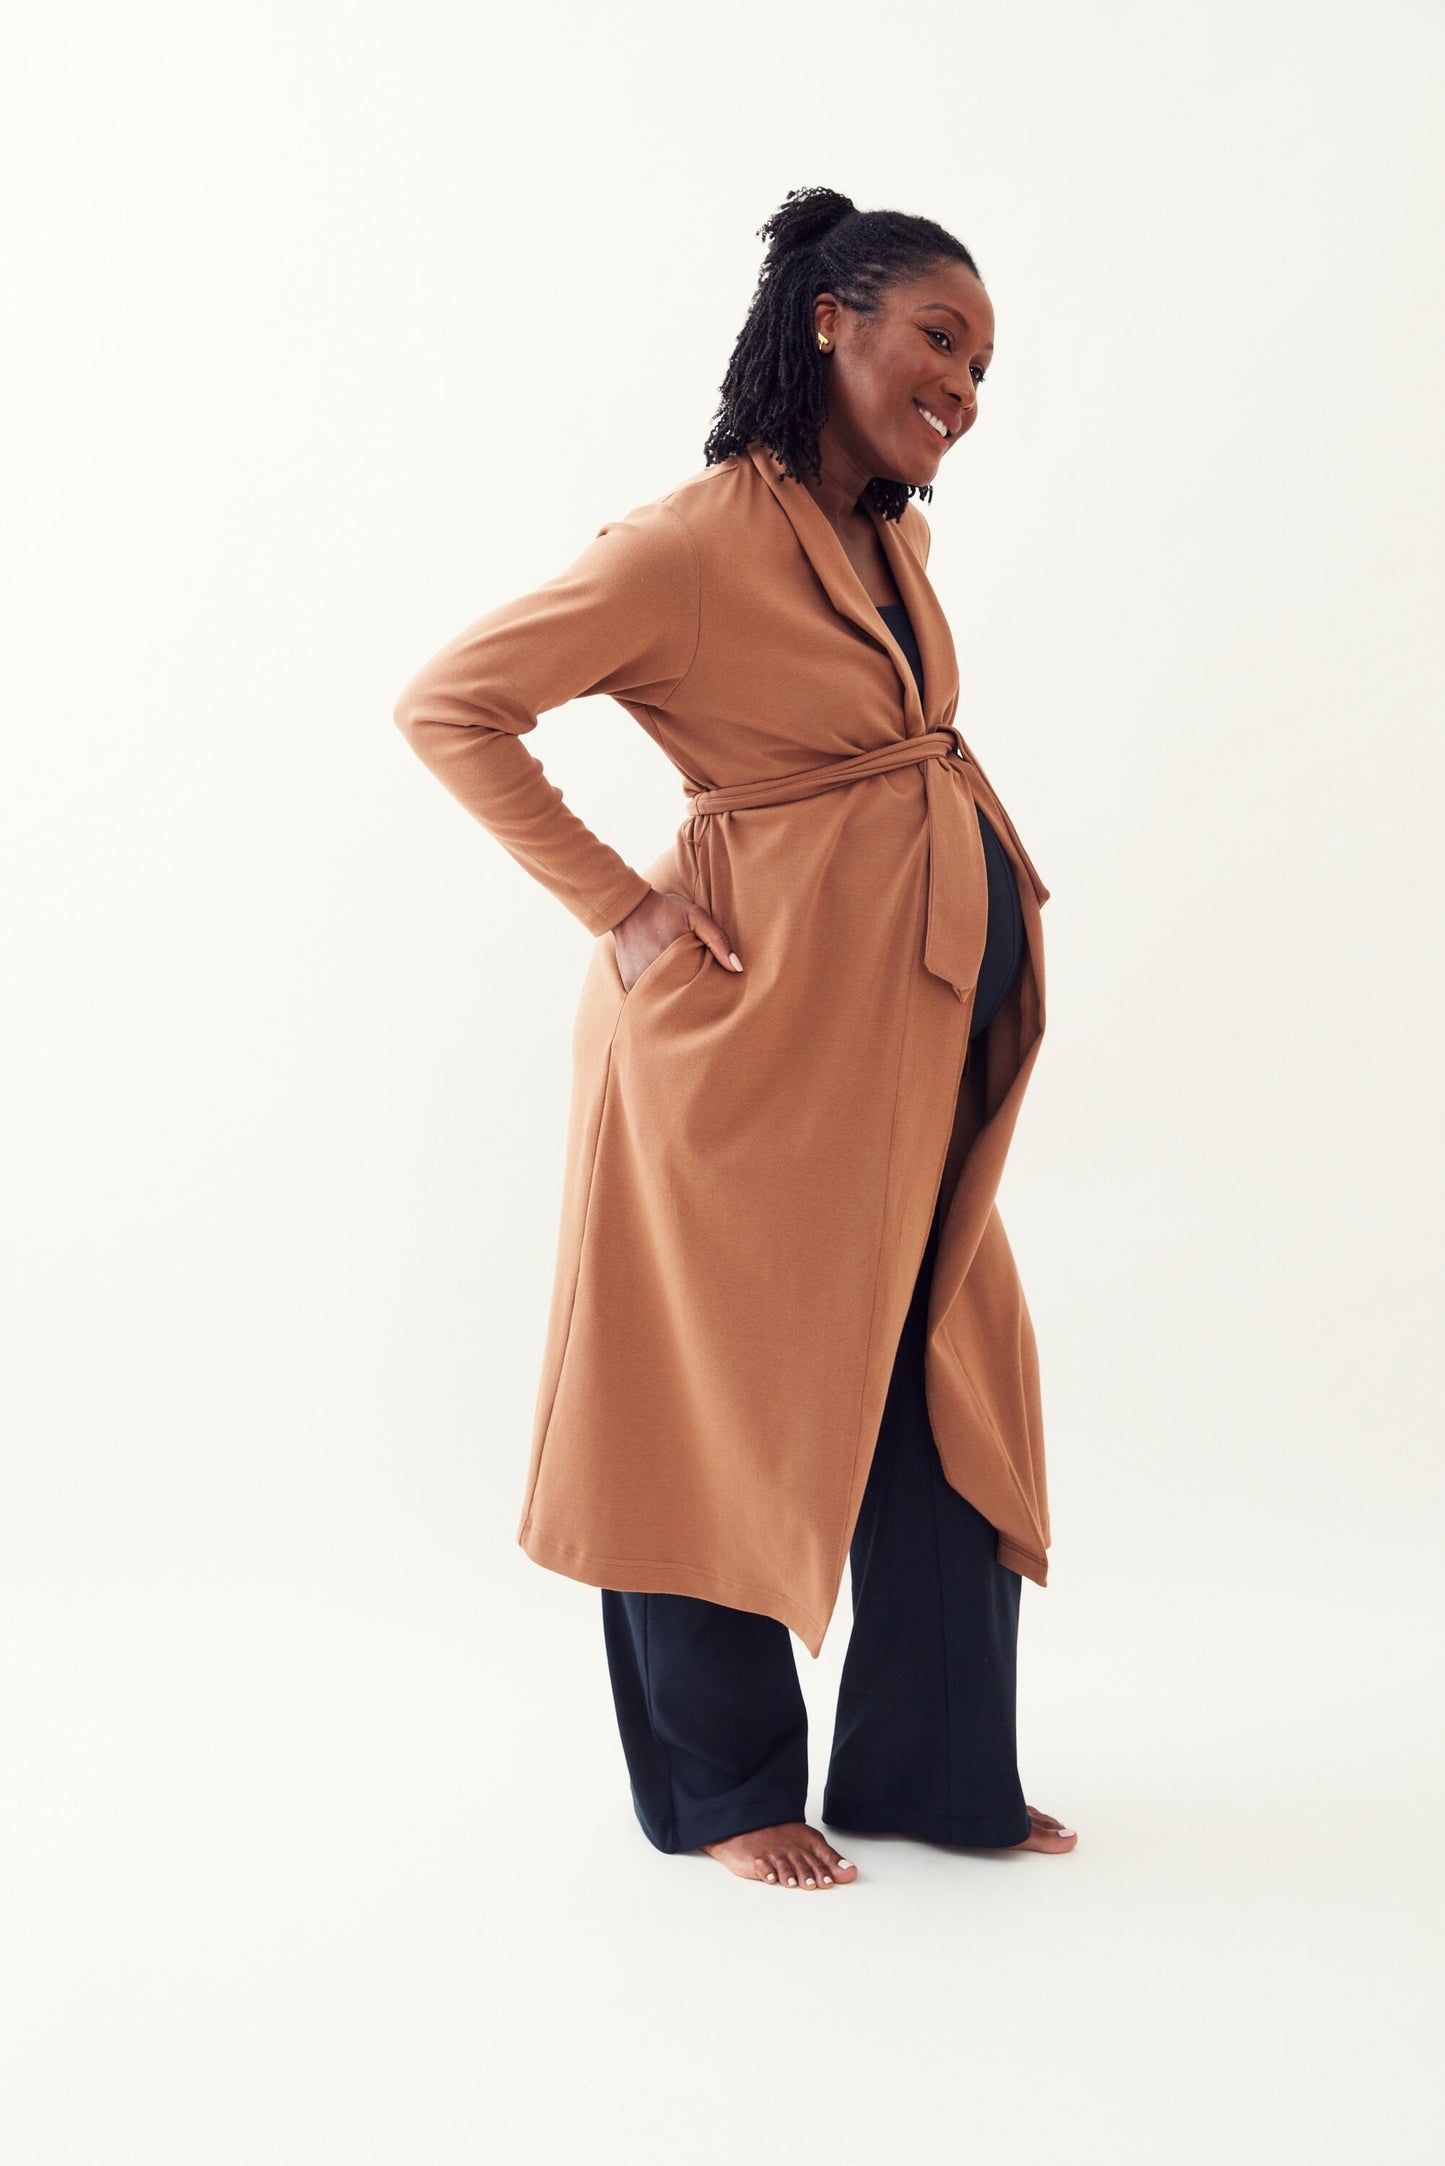 M Street model wearing the Zahra Over Belly Duster Cardigan in mocha